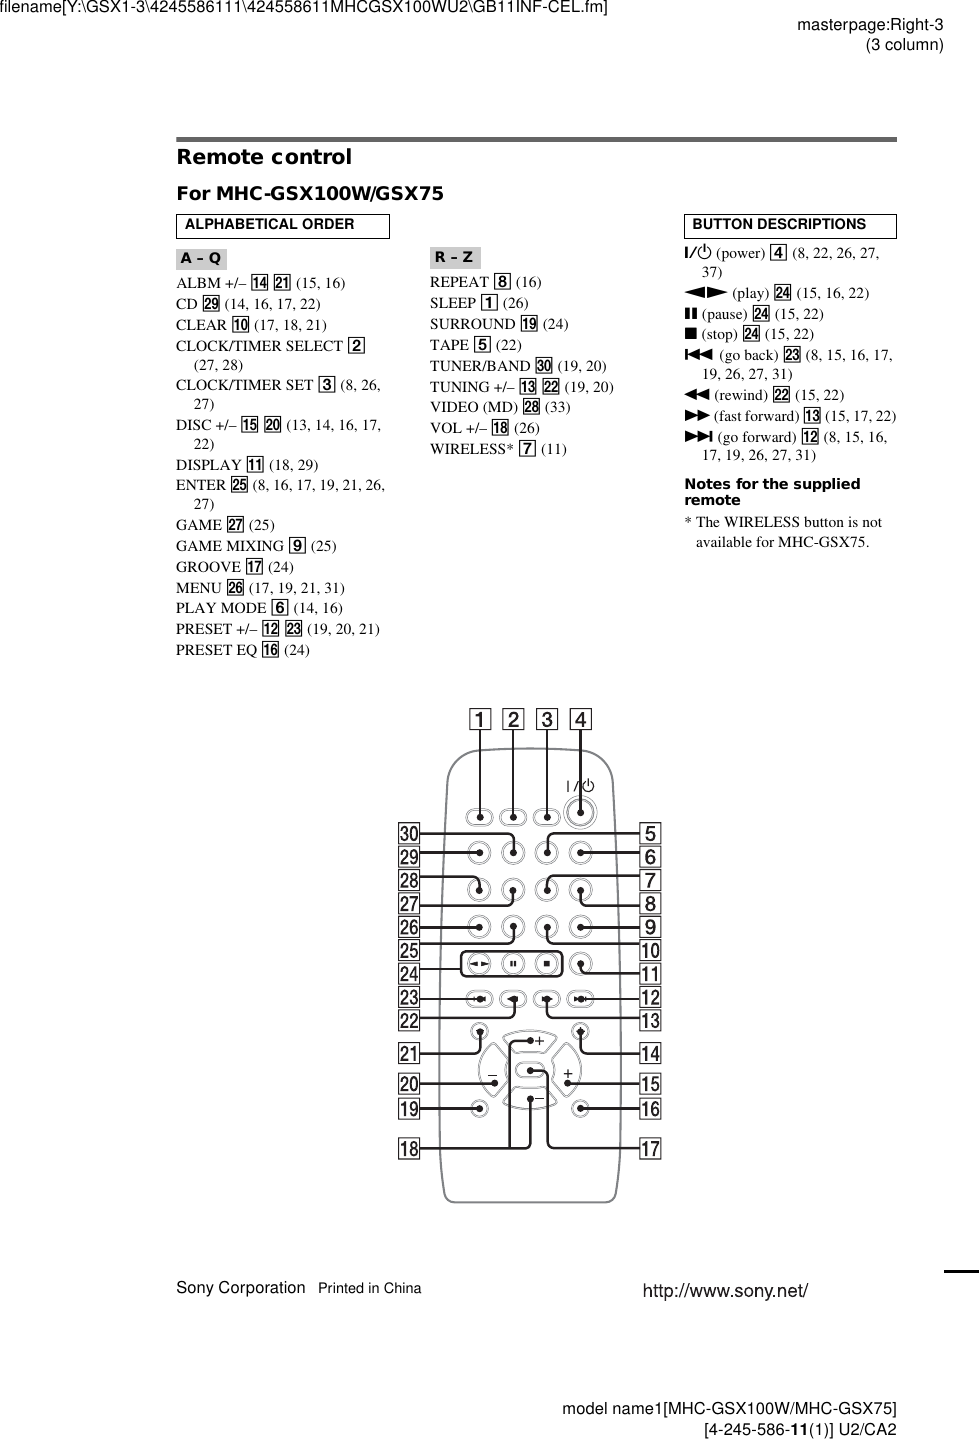 masterpage:Right-3(3 column)filename[Y:\GSX1-3\4245586111\424558611MHCGSX100WU2\GB11INF-CEL.fm]Sony Corporation   Printed in China model name1[MHC-GSX100W/MHC-GSX75] [4-245-586-11(1)] U2/CA2Remote controlFor MHC-GSX100W/GSX75ALBM +/– qf wa (15, 16)CD wl (14, 16, 17, 22)CLEAR q; (17, 18, 21)CLOCK/TIMER SELECT 2 (27, 28)CLOCK/TIMER SET 3 (8, 26,  27)DISC +/– qg w; (13, 14, 16, 17, 22)DISPLAY qa (18, 29)ENTER wg (8, 16, 17, 19, 21, 26, 27)GAME wj (25)GAME MIXING 9 (25)GROOVE qj (24)MENU wh (17, 19, 21, 31)PLAY MODE 6 (14, 16)PRESET +/– qs wd (19, 20, 21)PRESET EQ qh (24)REPEAT 8 (16)SLEEP 1 (26)SURROUND ql (24)TAPE 5 (22)TUNER/BAND e; (19, 20)TUNING +/– qd ws (19, 20)VIDEO (MD) wk (33)VOL +/– qk (26)WIRELESS* 7 (11)?/1 (power) 4 (8, 22, 26, 27, 37)nN (play) wf (15, 16, 22)X (pause) wf (15, 22)x (stop) wf (15, 22). (go back) wd (8, 15, 16, 17, 19, 26, 27, 31)m (rewind) ws (15, 22)M (fast forward) qd (15, 17, 22)&gt; (go forward) qs (8, 15, 16, 17, 19, 26, 27, 31)Notes for the supplied remote* The WIRELESS button is not available for MHC-GSX75.ALPHABETICAL ORDERA – Q R – ZBUTTON DESCRIPTIONS